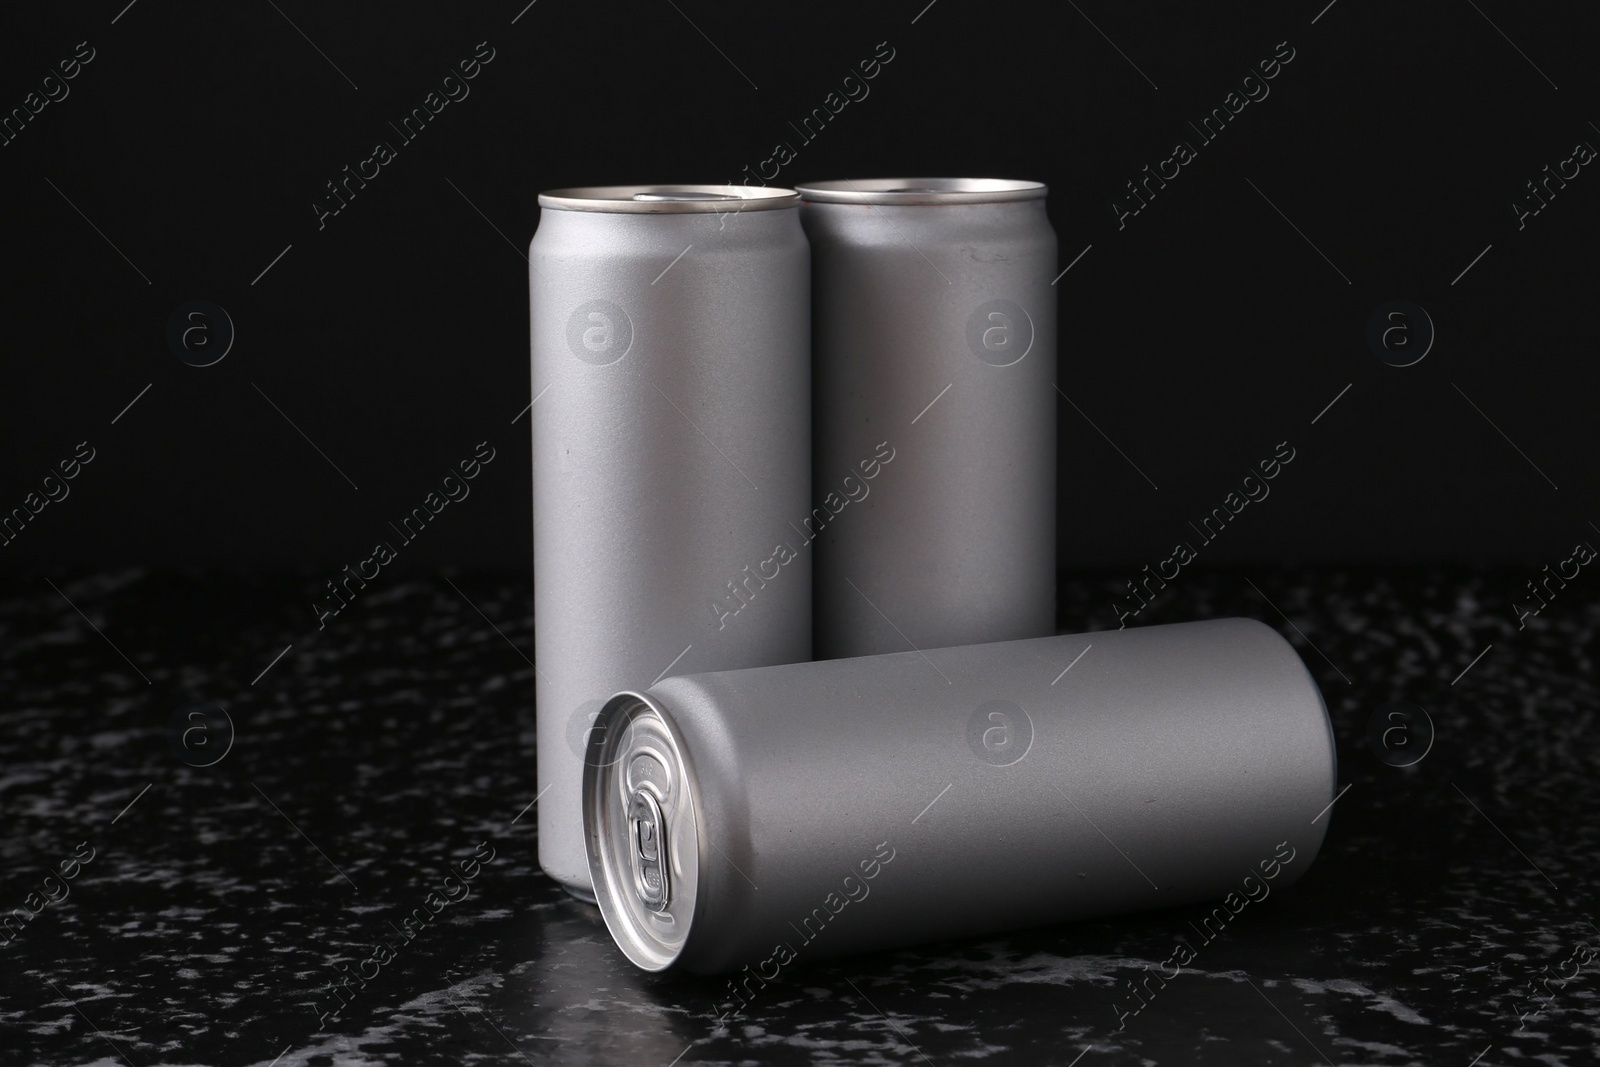 Photo of Energy drinks in cans on black textured table